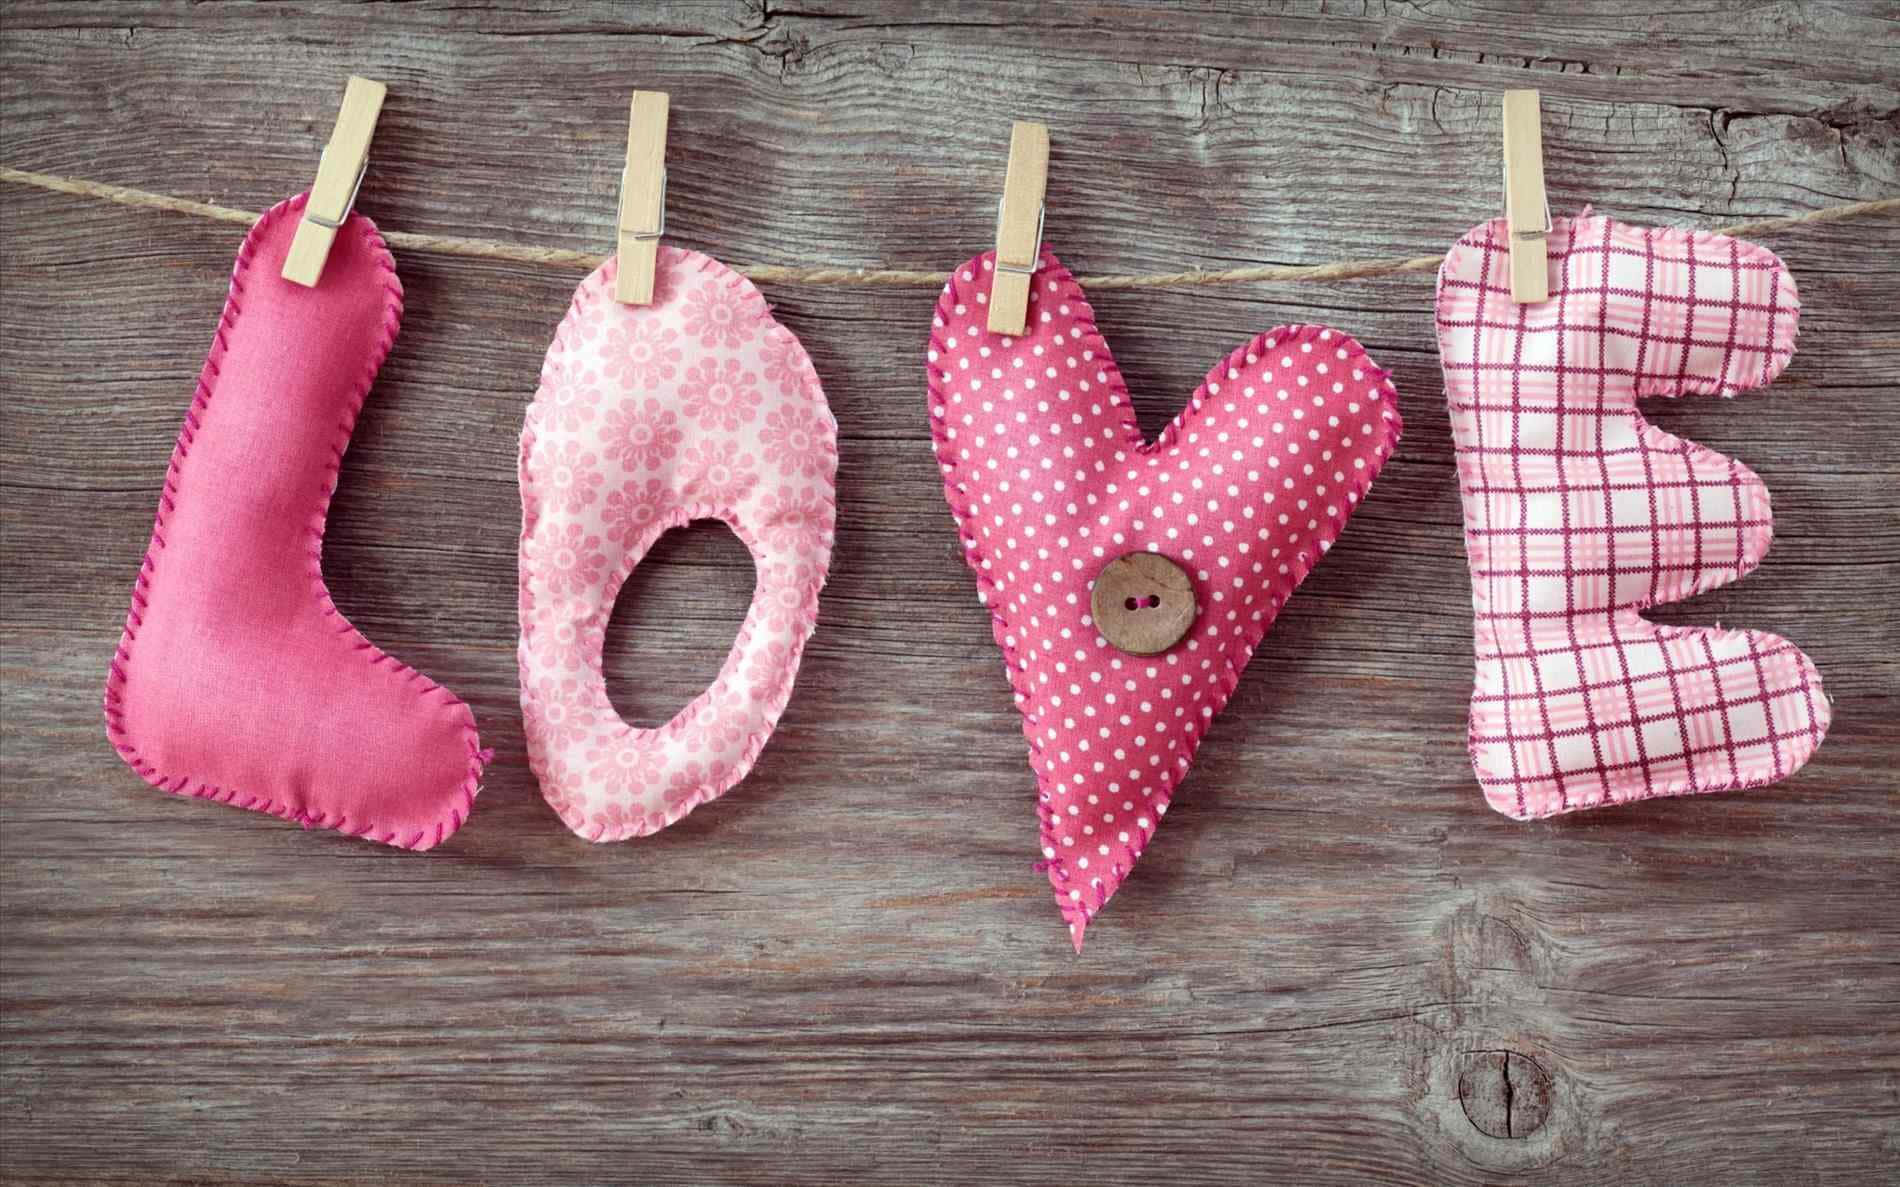 Celebrate Valentine's Day with Love and Joy.